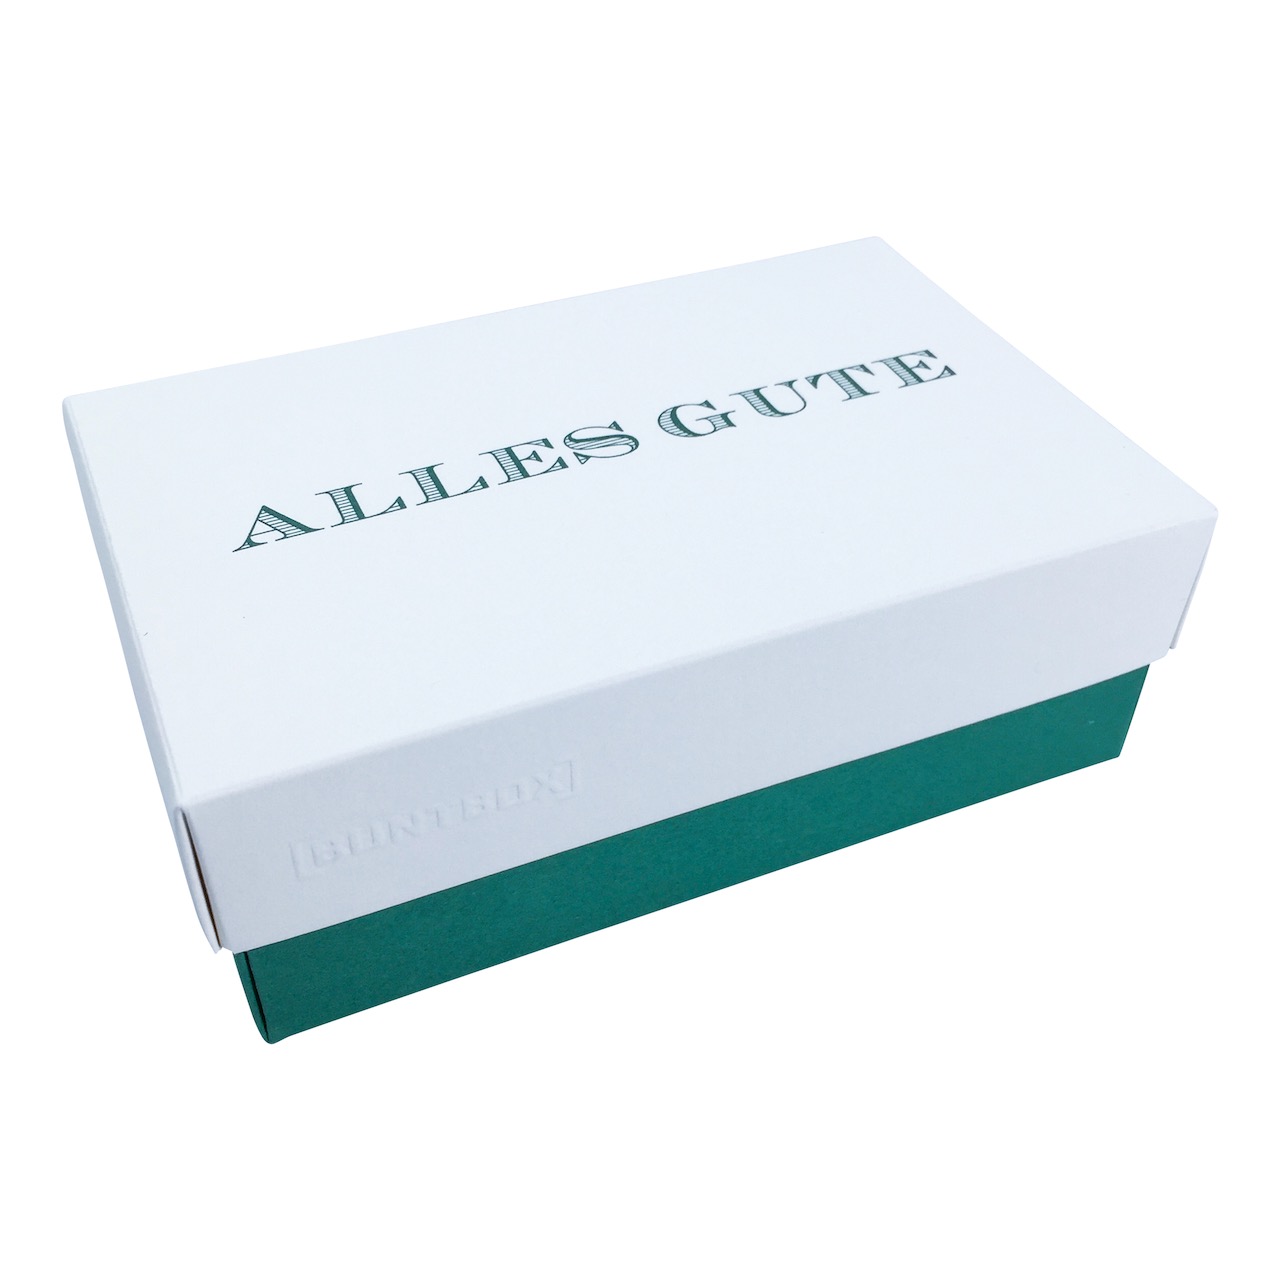 Buntbox XL Fine Paper Alles Gute in Champagner-Emerald